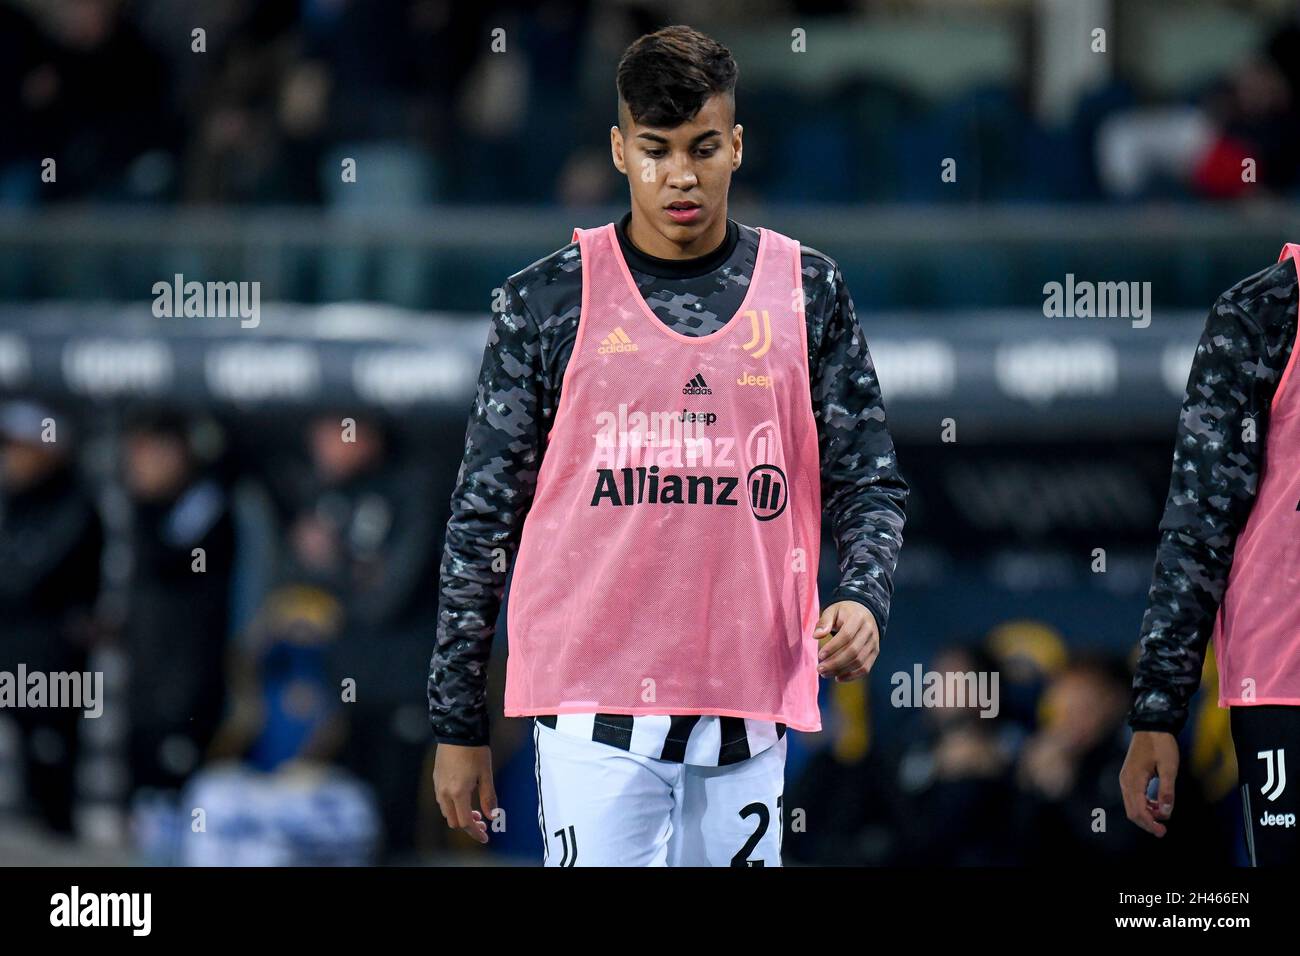 Verona, Italy. 30th Oct, 2021. Kaio Jorge (Juventus) portrait during Hellas Verona FC vs Juventus FC, italian soccer Serie A match in Verona, Italy, October 30 2021 Credit: Independent Photo Agency/Alamy Live News Stock Photo